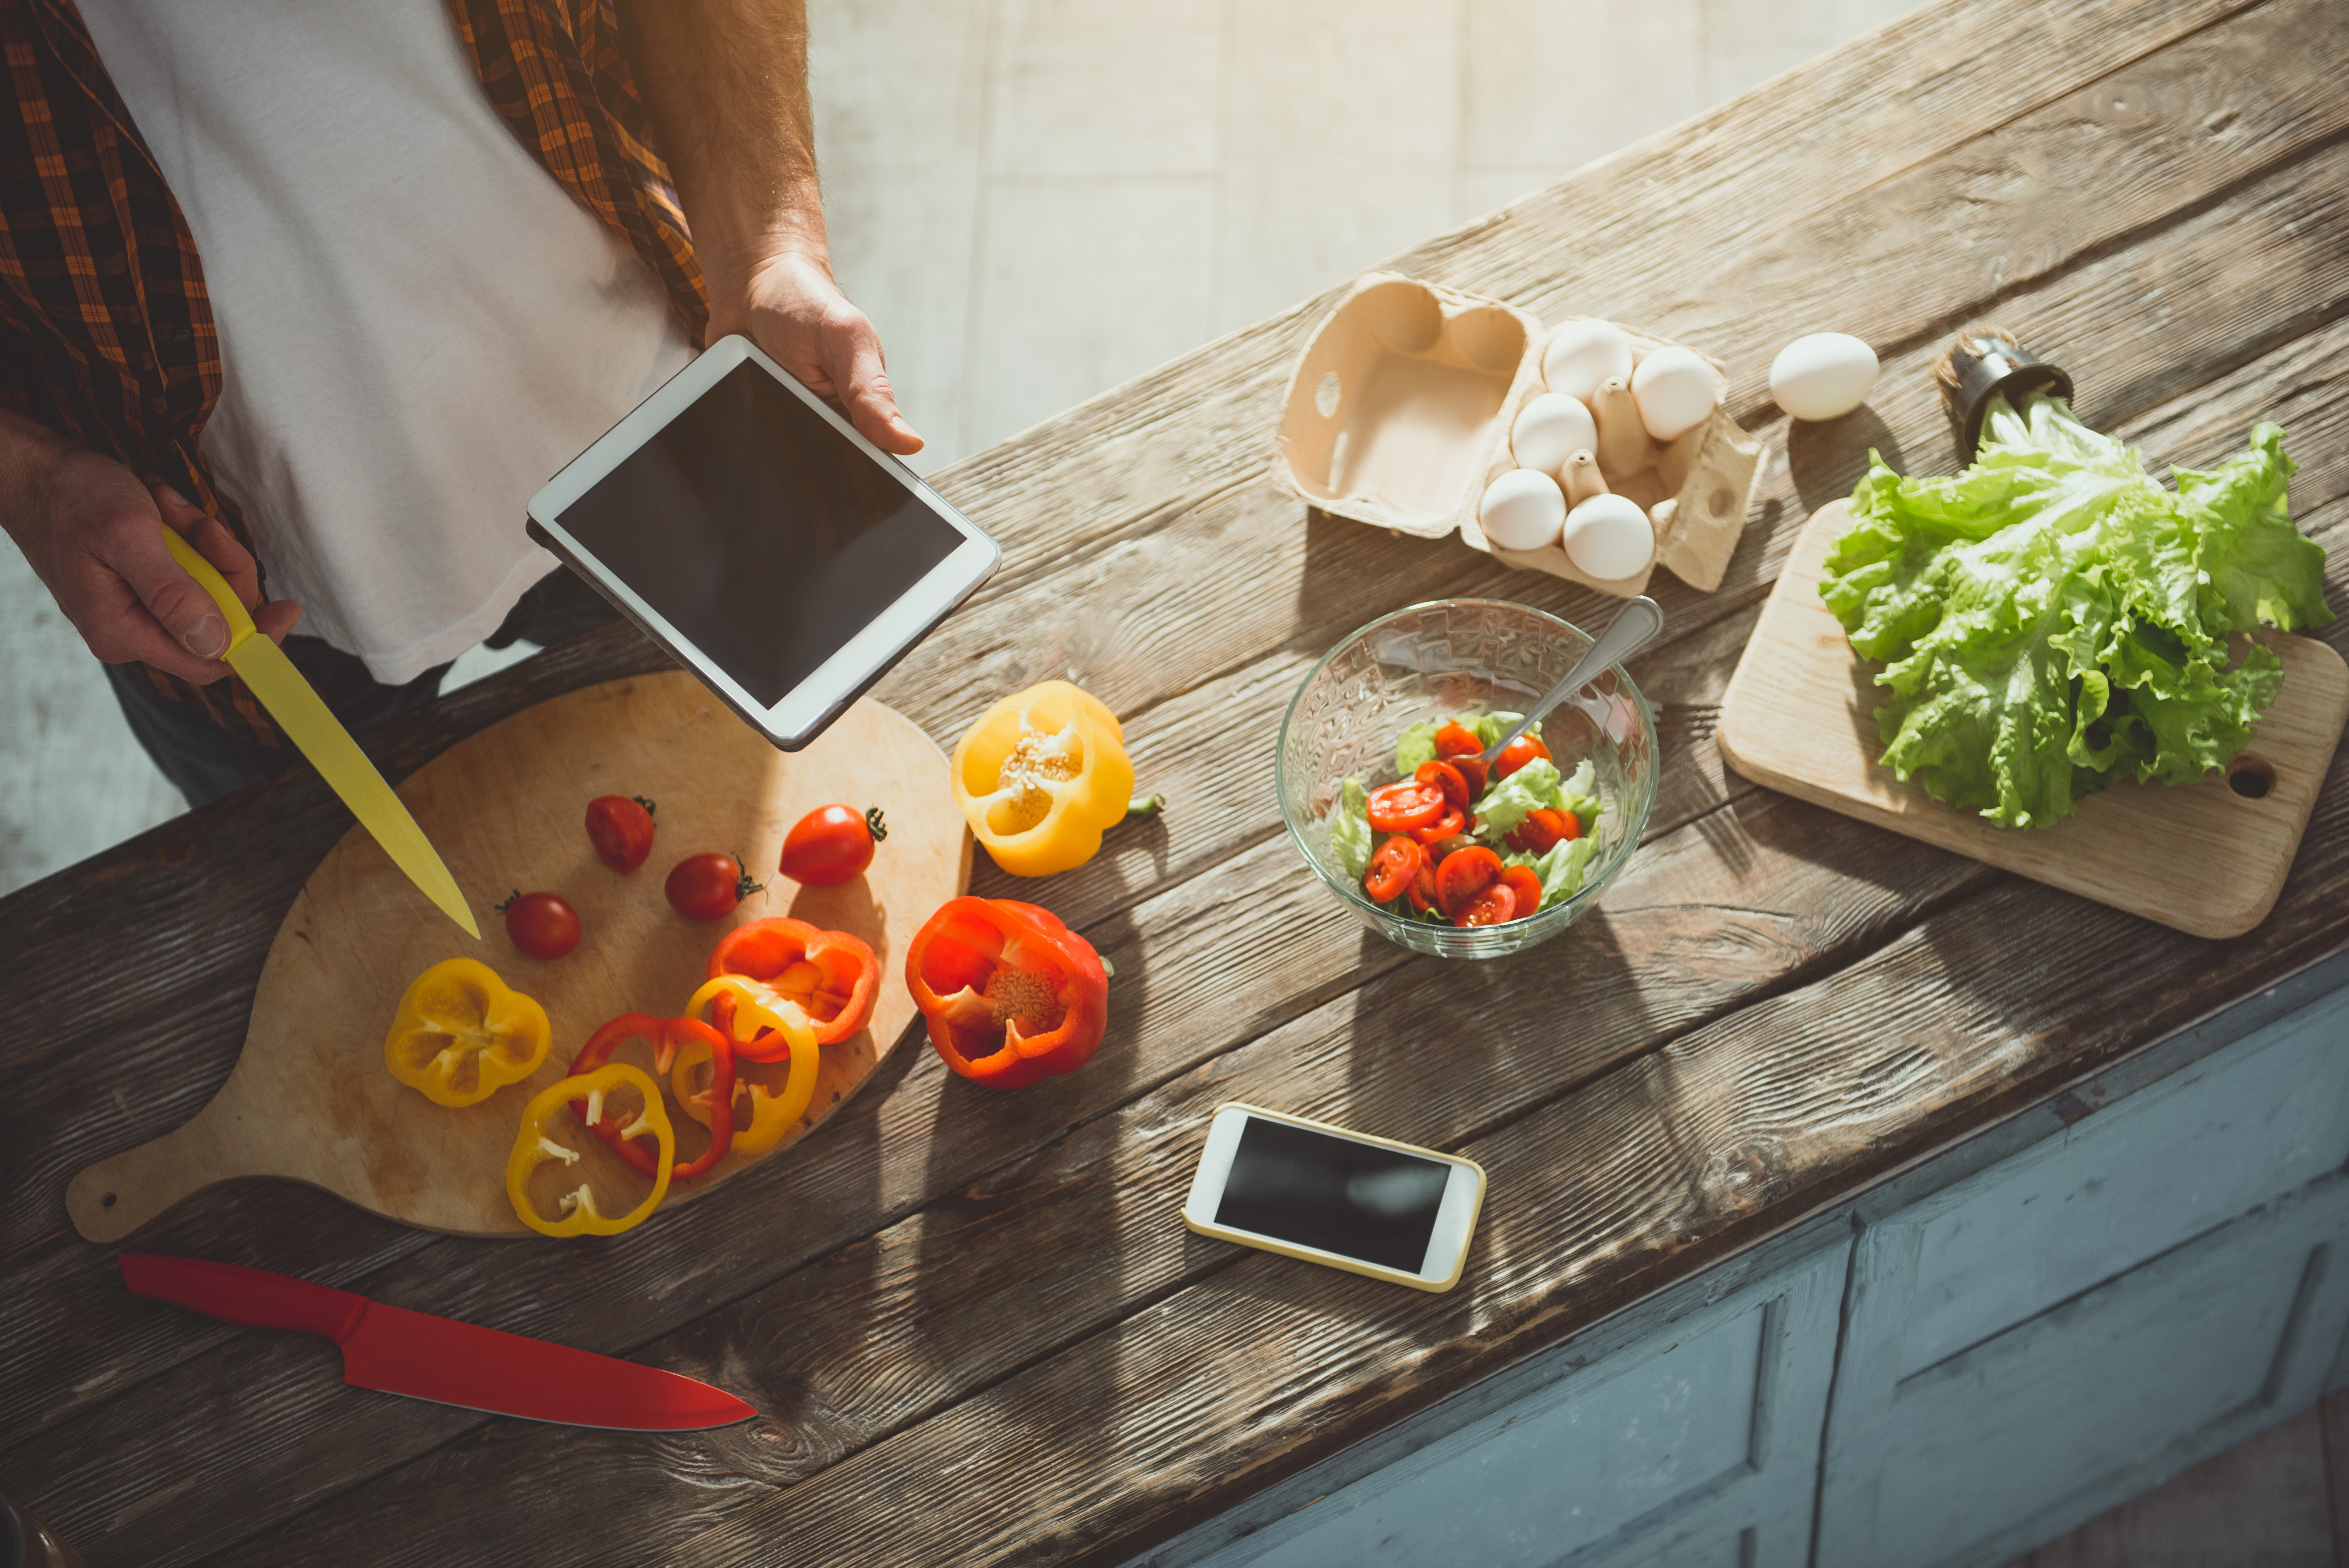 Must-have kitchen gadgets for a healthy lifestyle